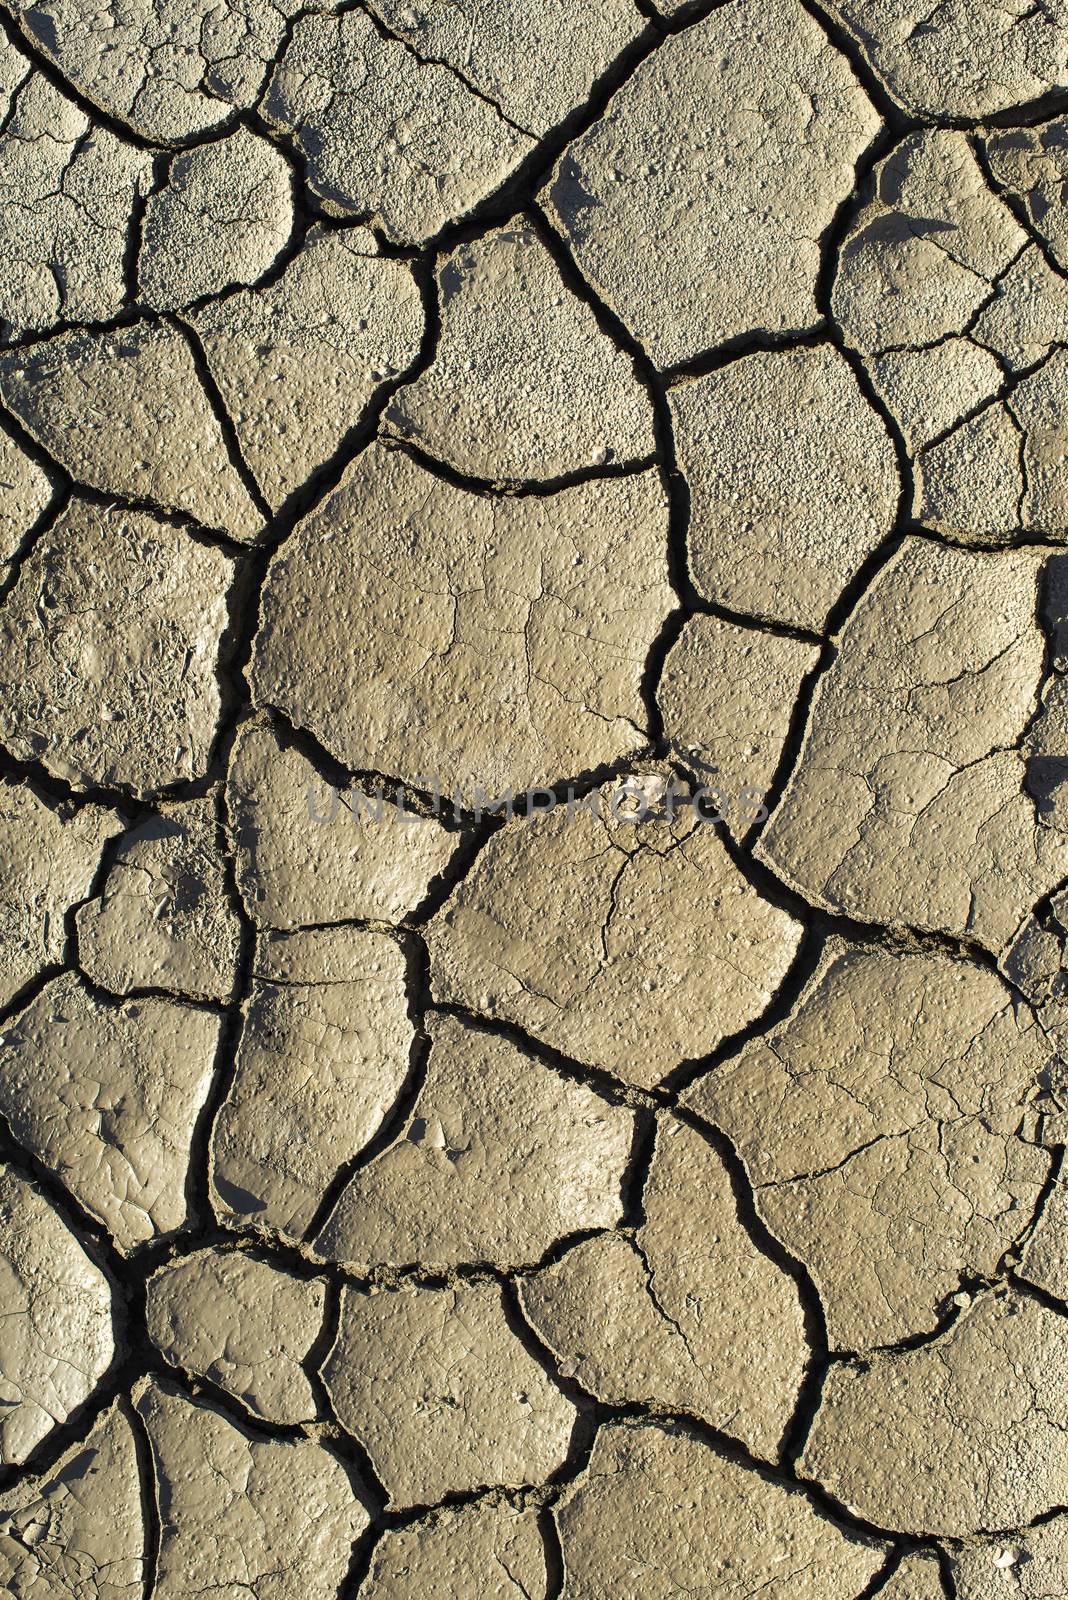 Cracked soil texture. Hard shadows and sun. Dried ground. Pattern of many cracks for background. 